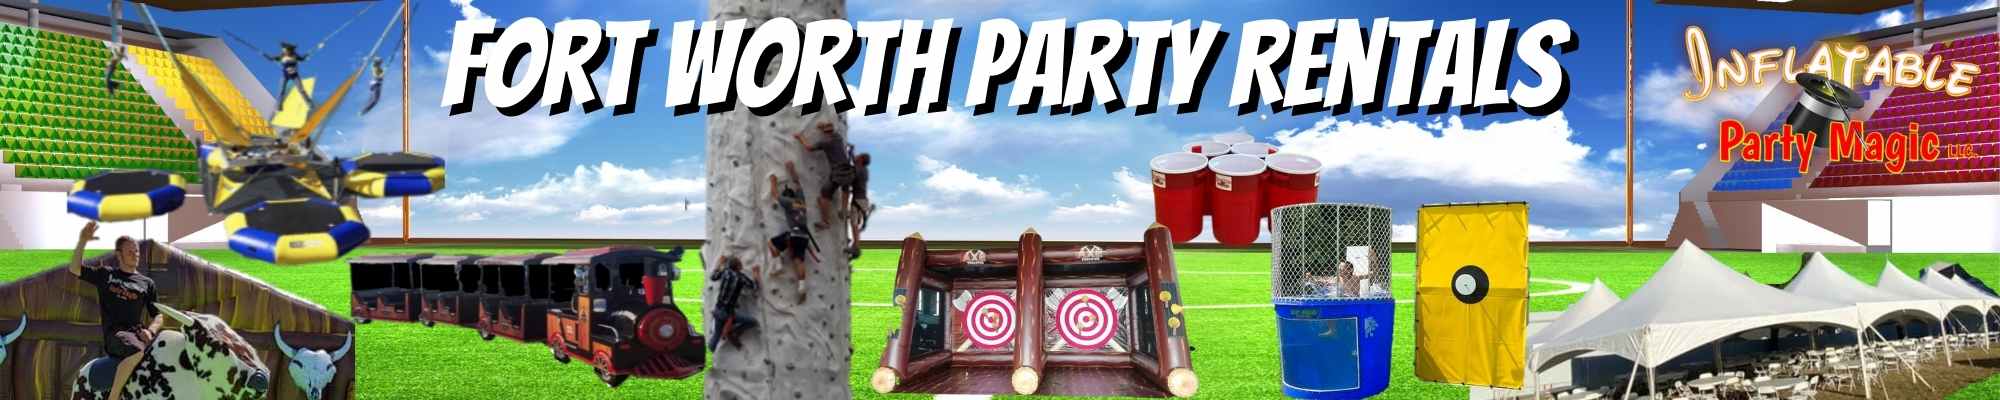 Fort Worth Party Rentals